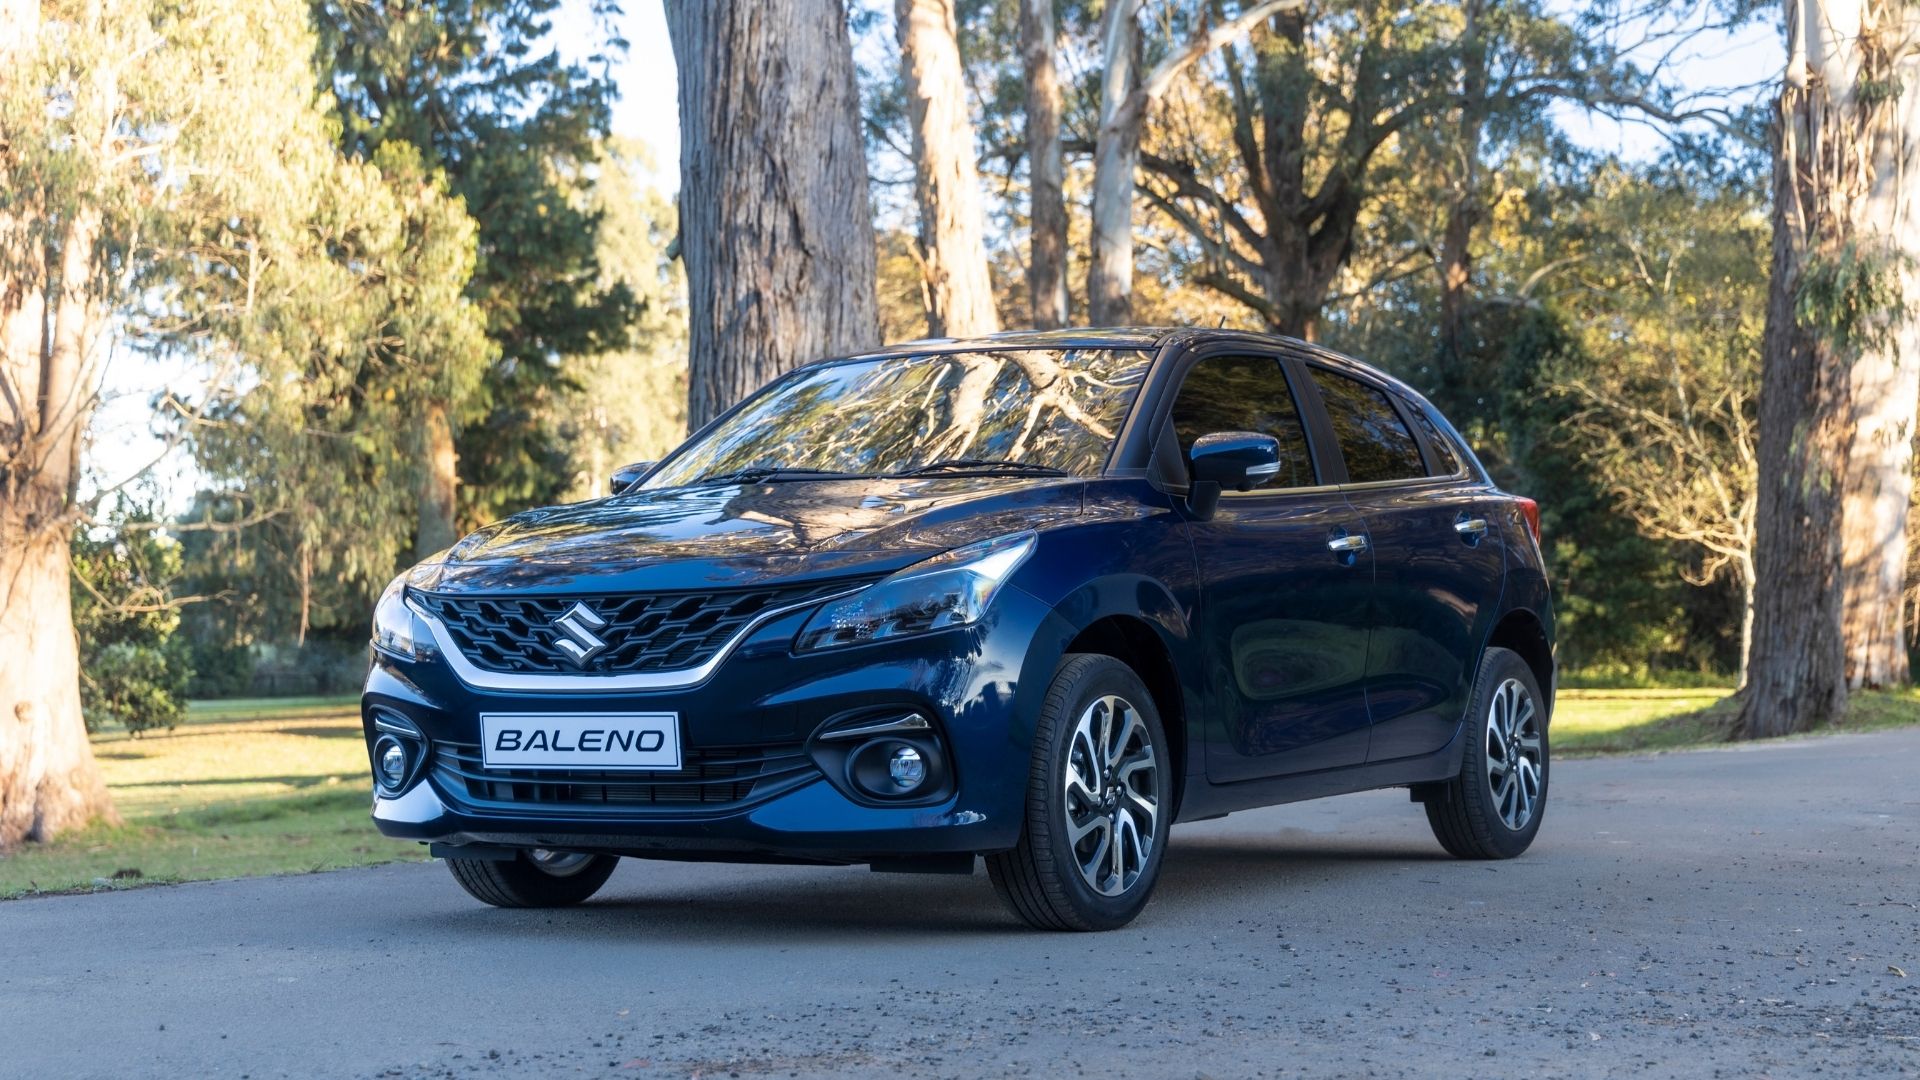 9 things we love about the Baleno